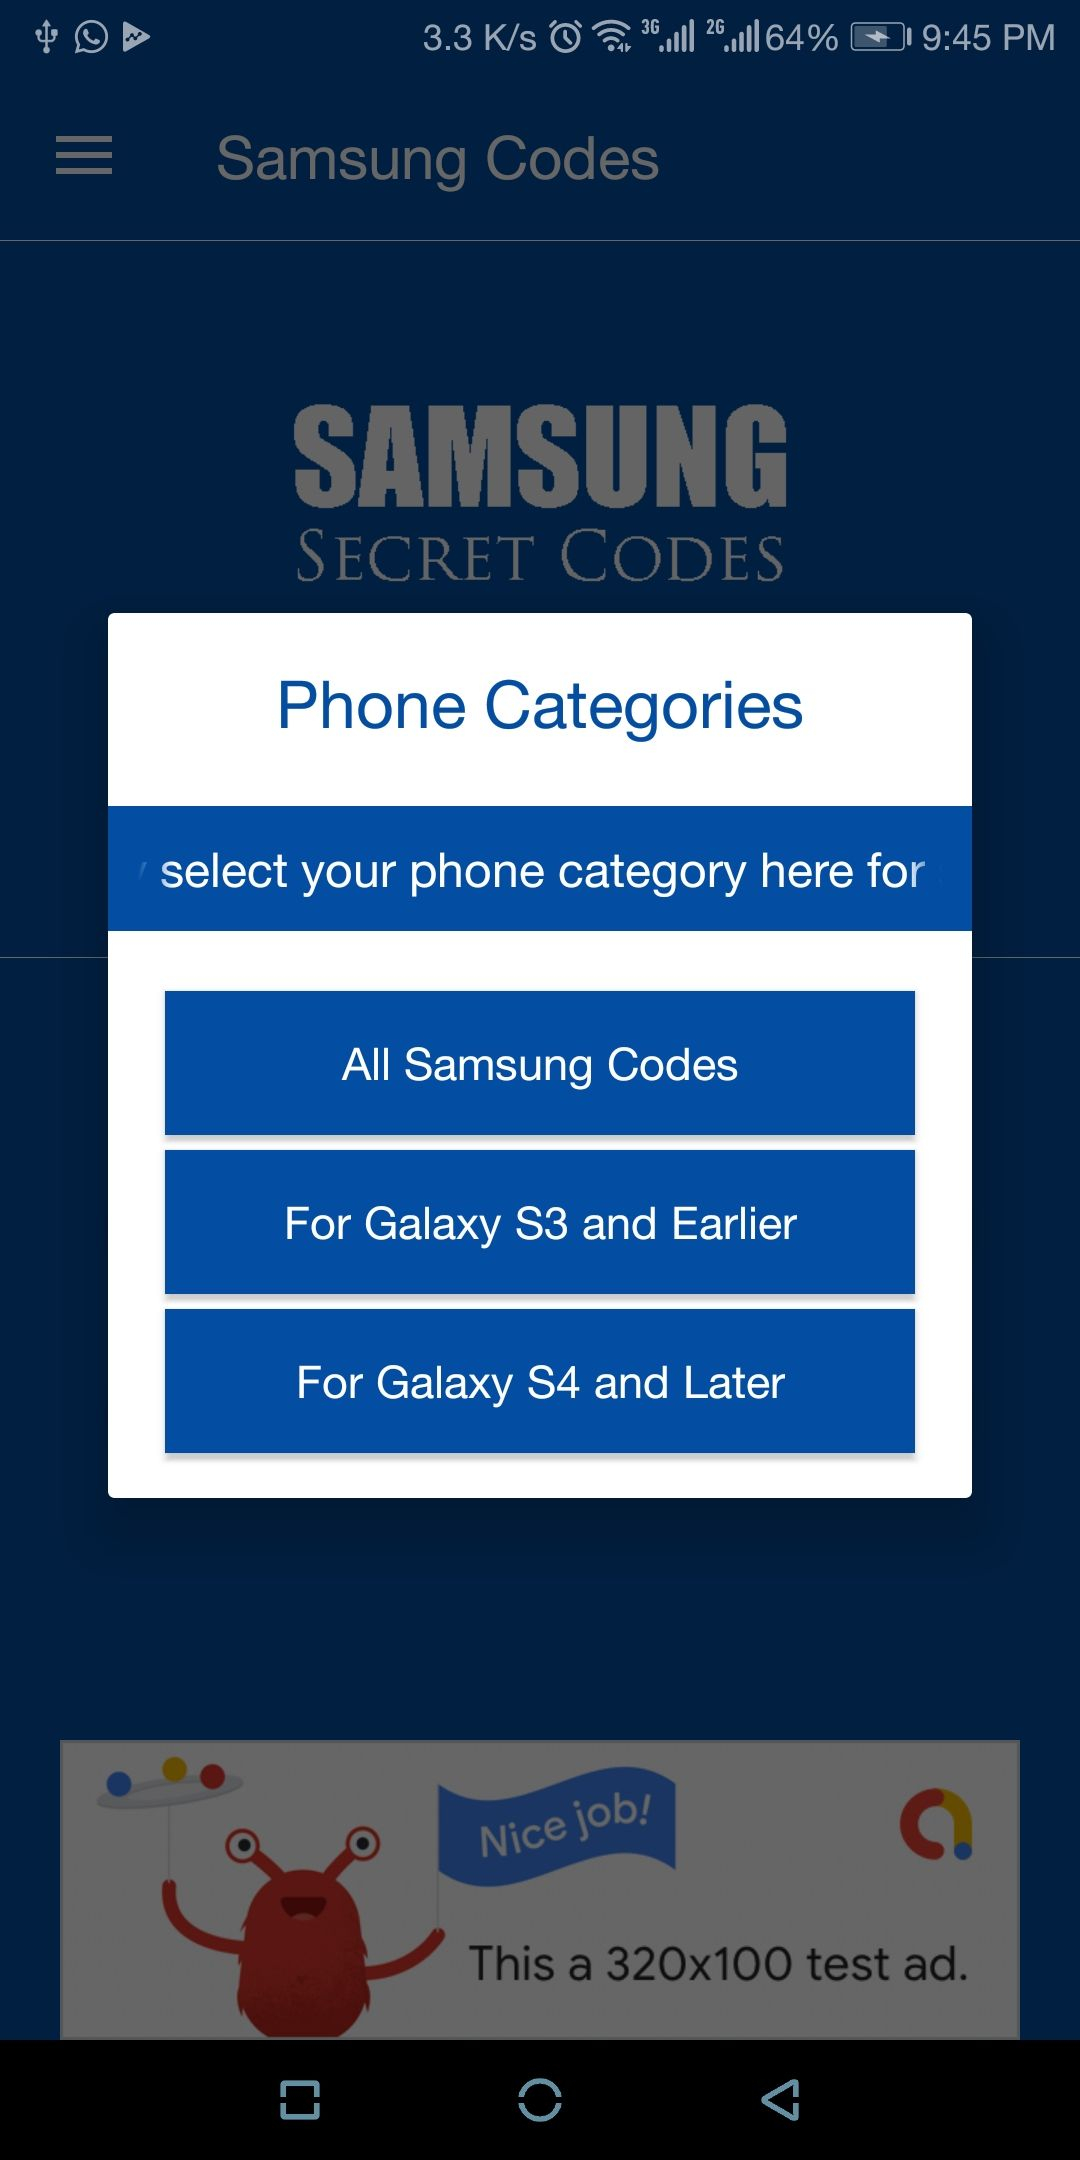 Samsung Secret Codes Android Source Code By Nadeemtaj5 